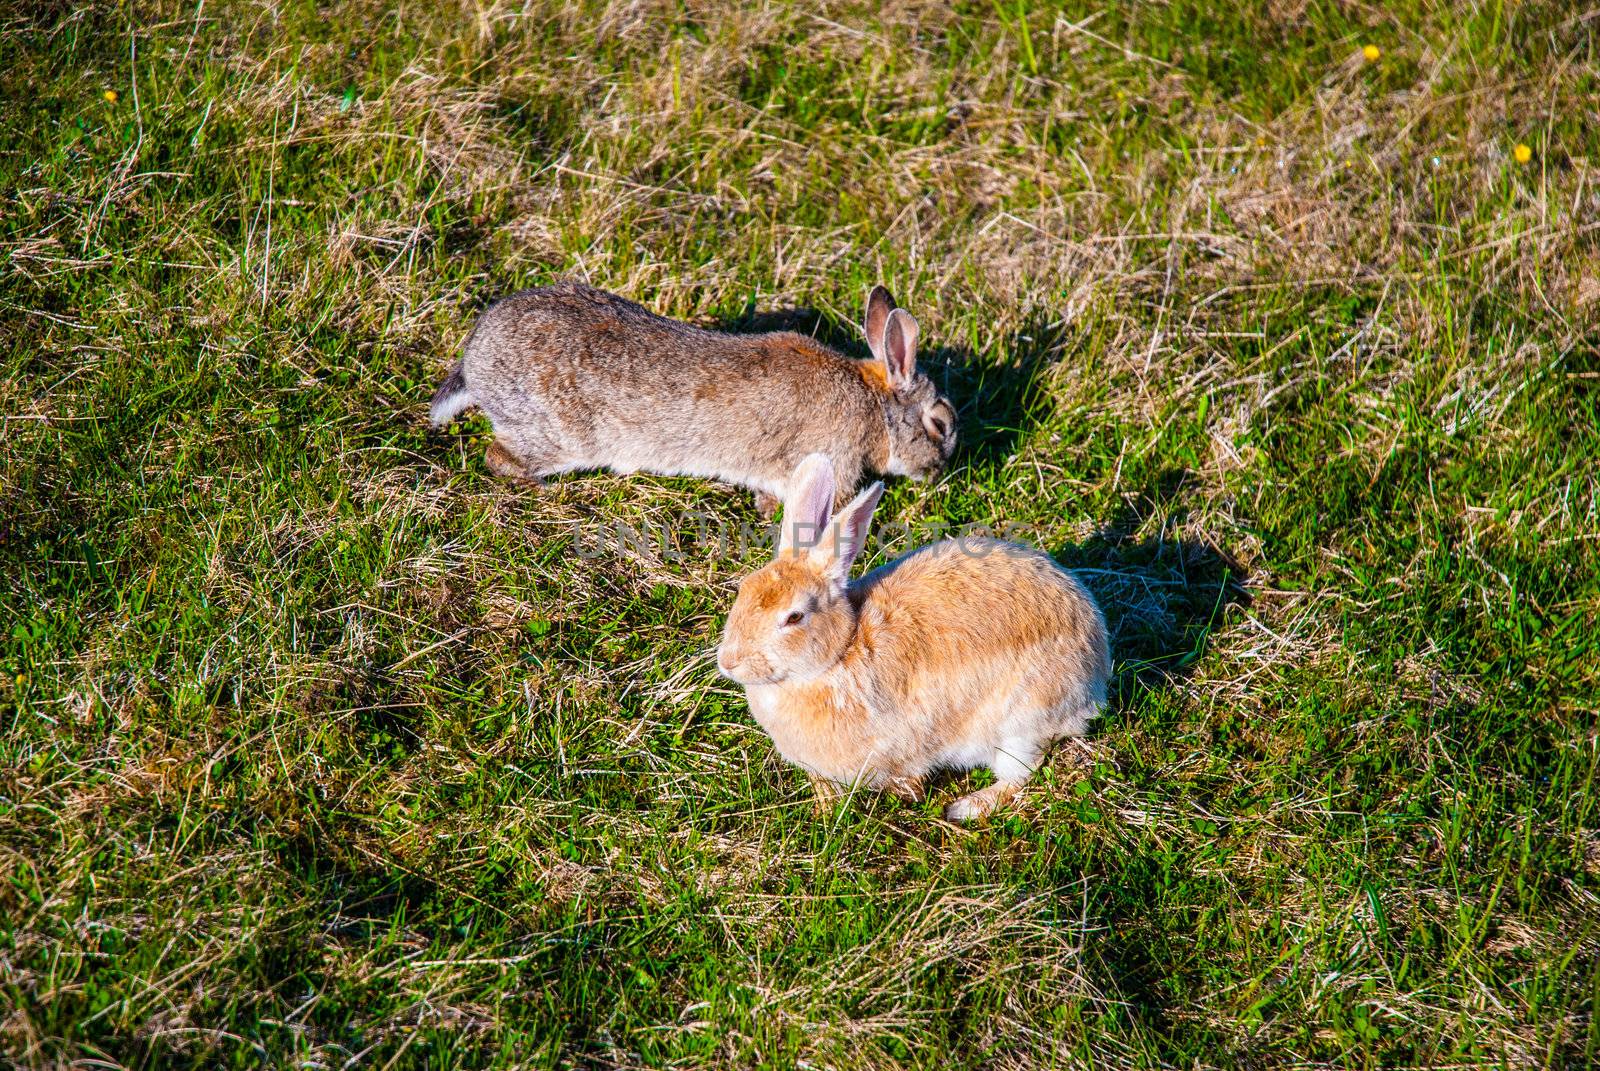 Two hares in their natural habitat, Iceland by kryvan